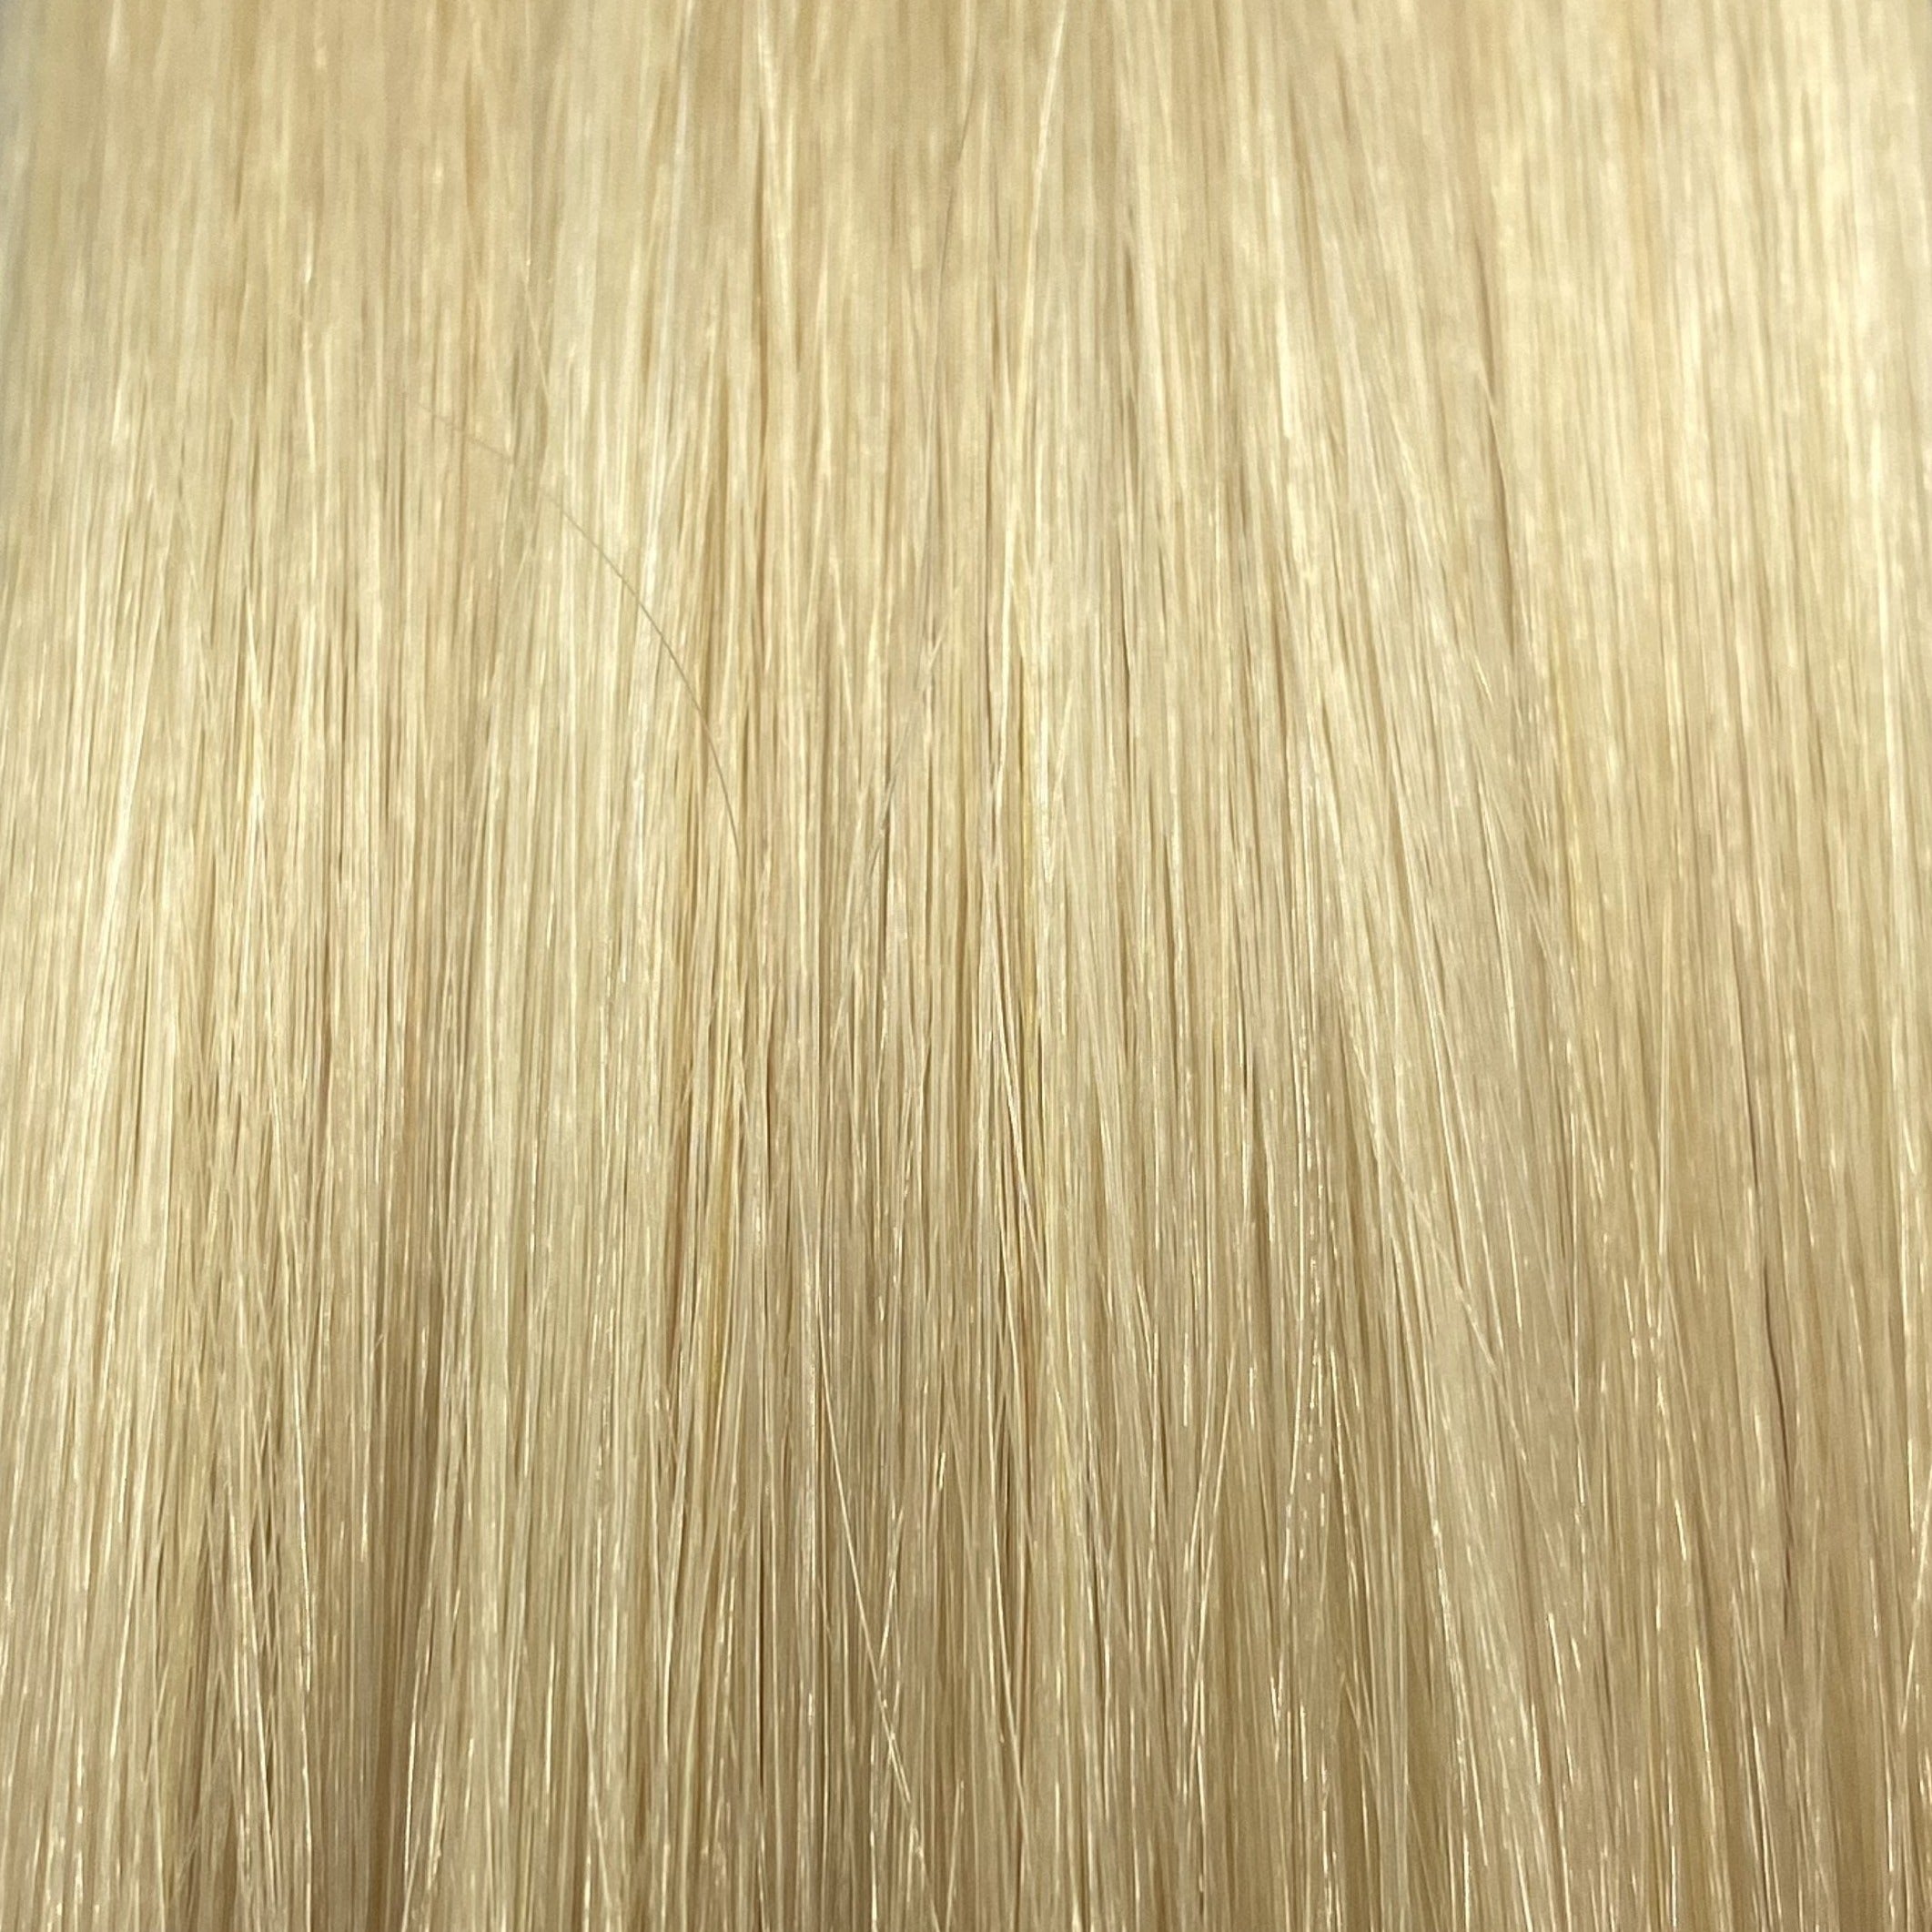 FUSION #1002 VERY LIGHT ASH BLONDE 60CM/ 24 INCHES  -  25 GRAMS